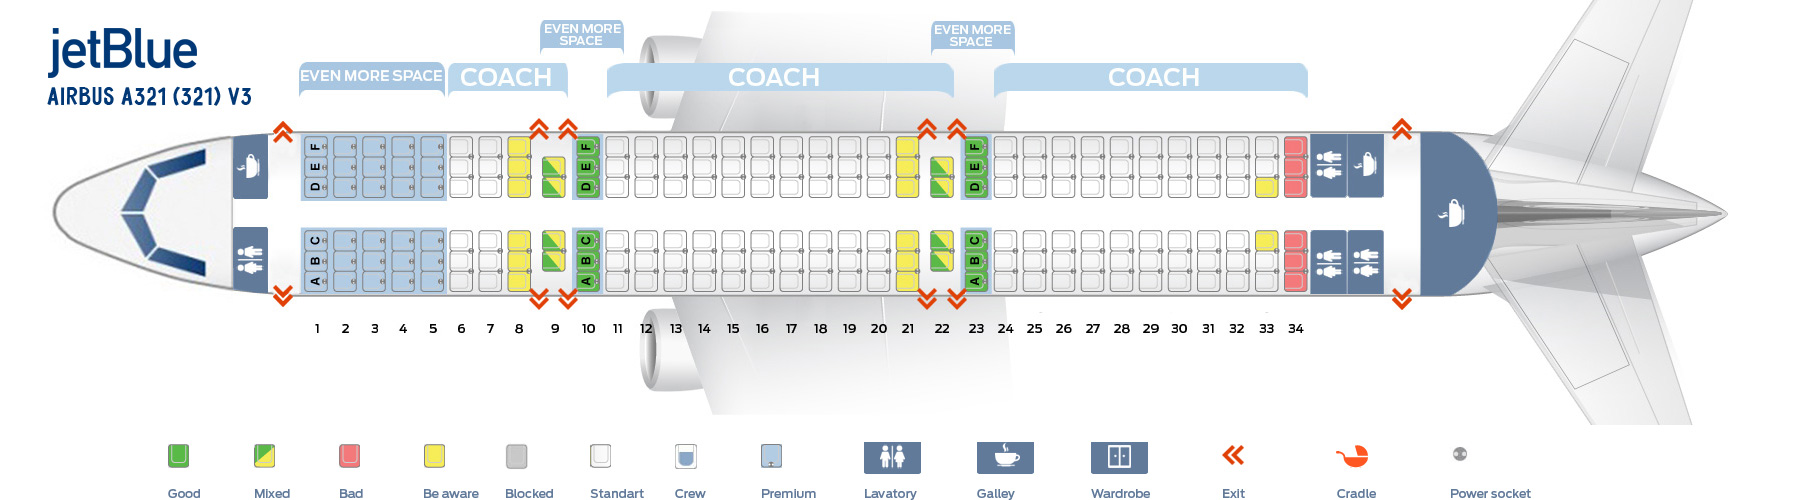 Seat Map Airbus A321-200 V3 JetBlue